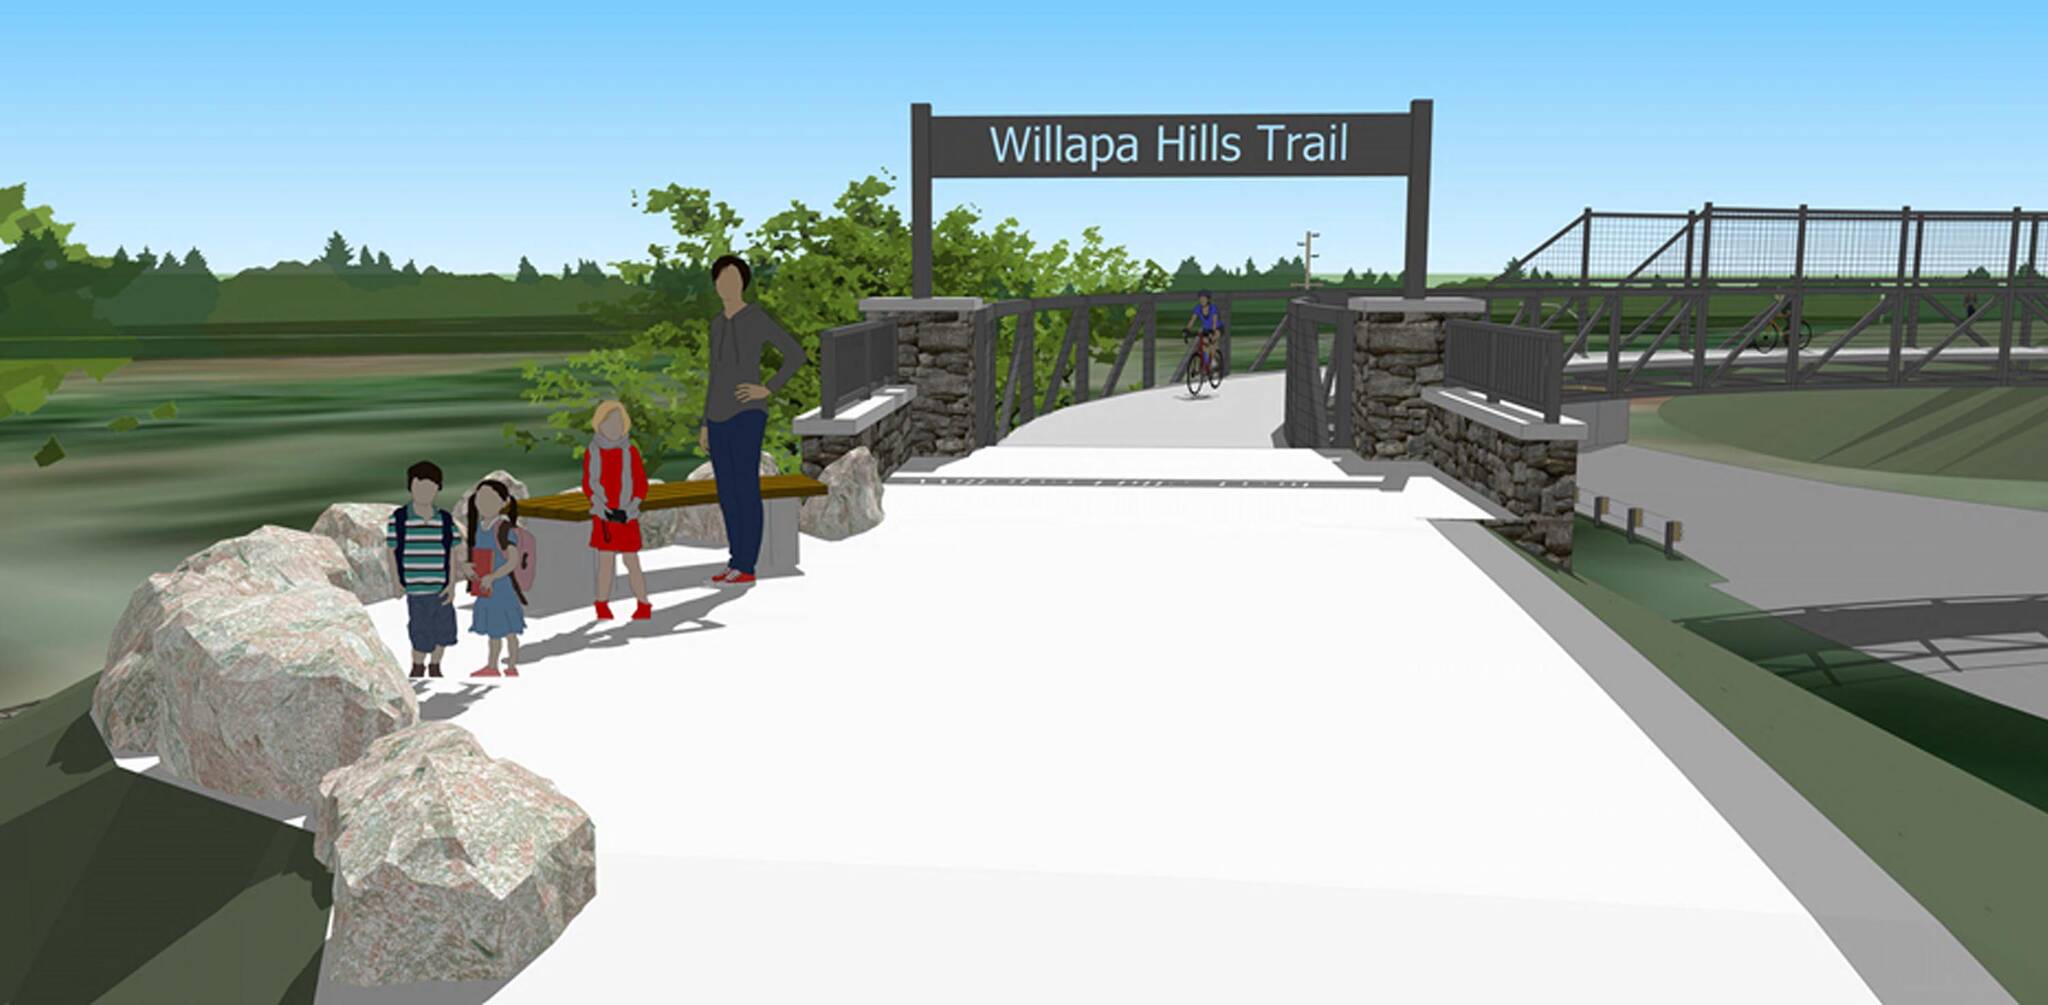 The bridge over State Route 6 on the Willapa Hills Trail is under construction. The $3.3 million project is expected to be completed in about a year. 9Courtesy Washington State Parks)